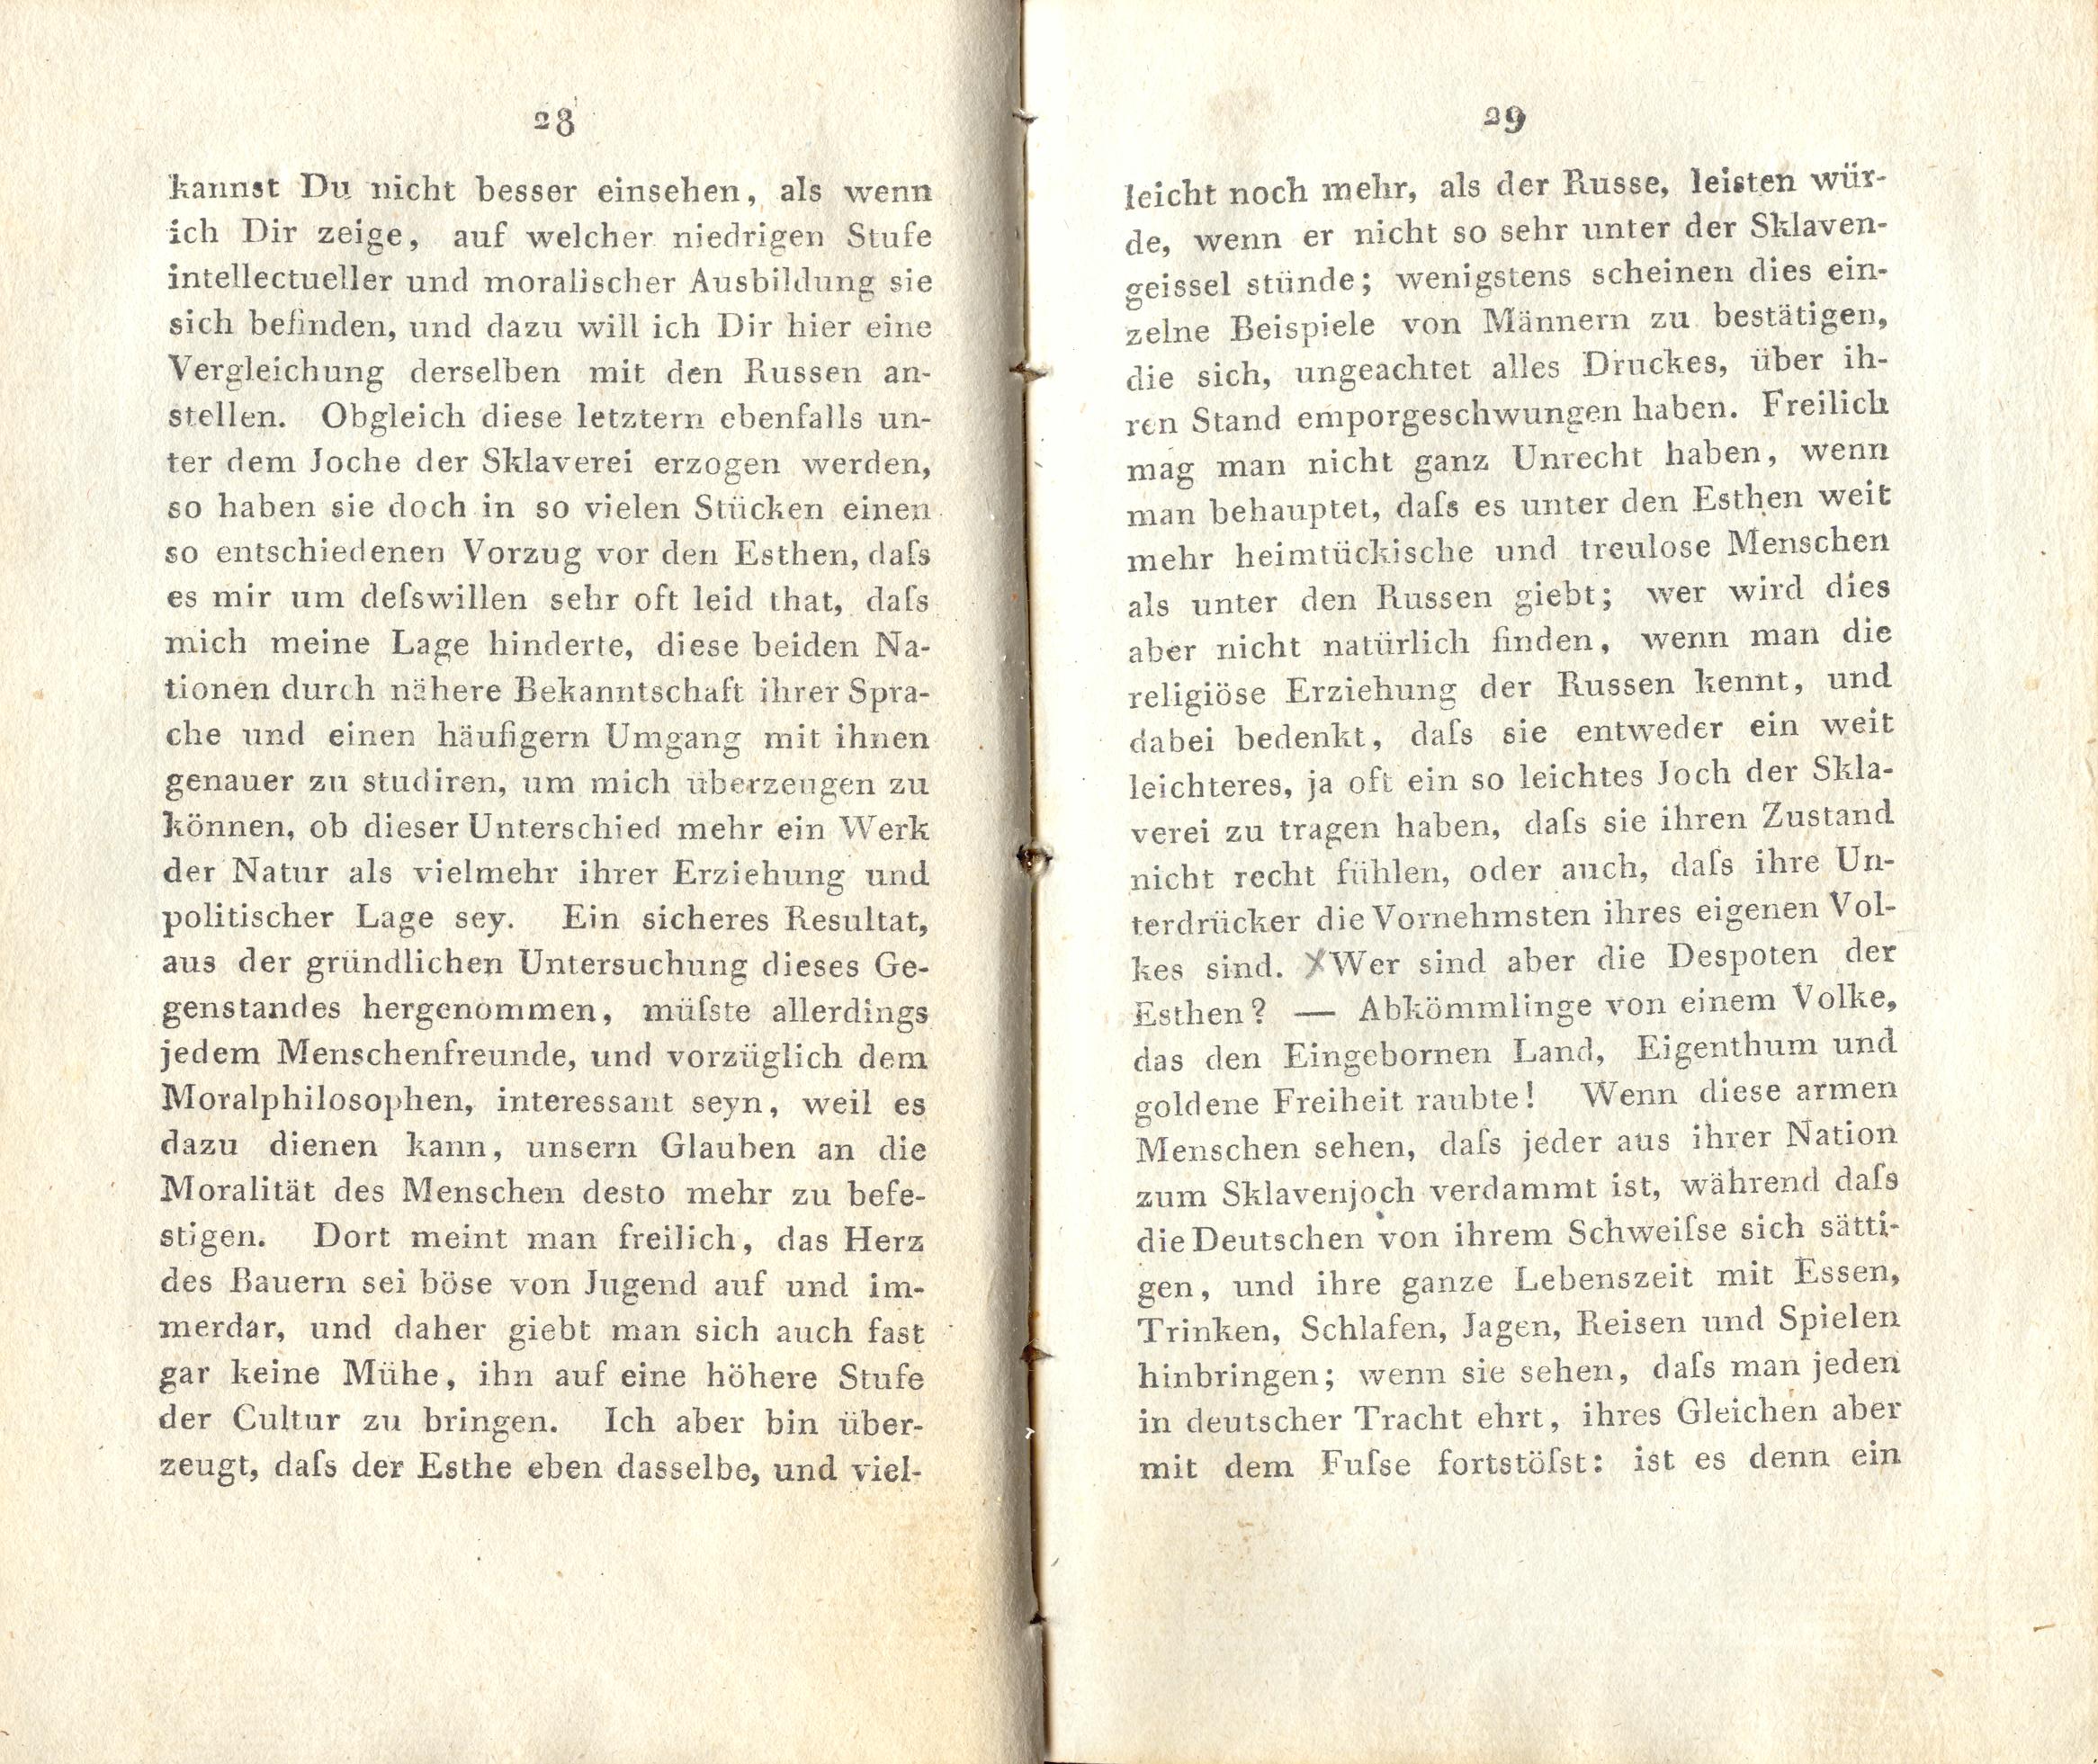 Briefe über Reval (1800) | 15. (28-29) Main body of text